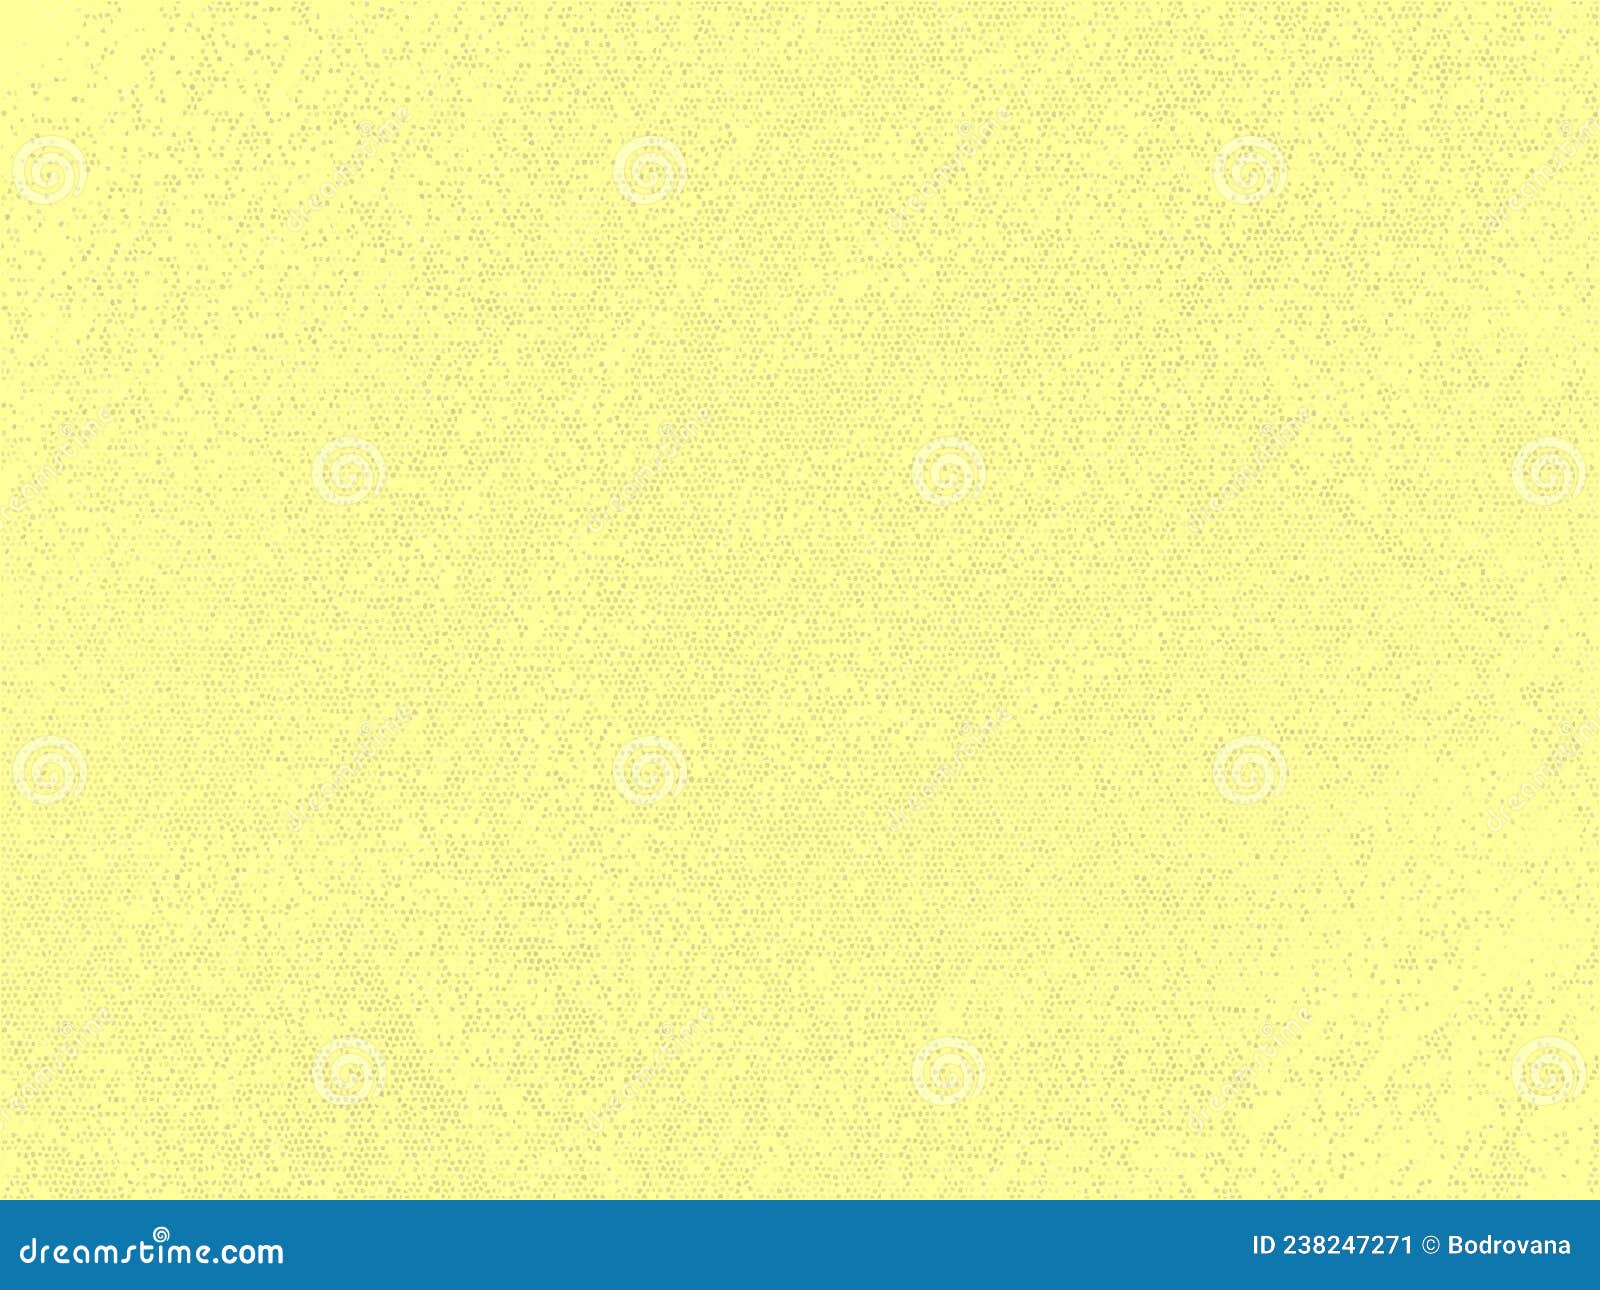 100 Pale Yellow Background s  Wallpaperscom